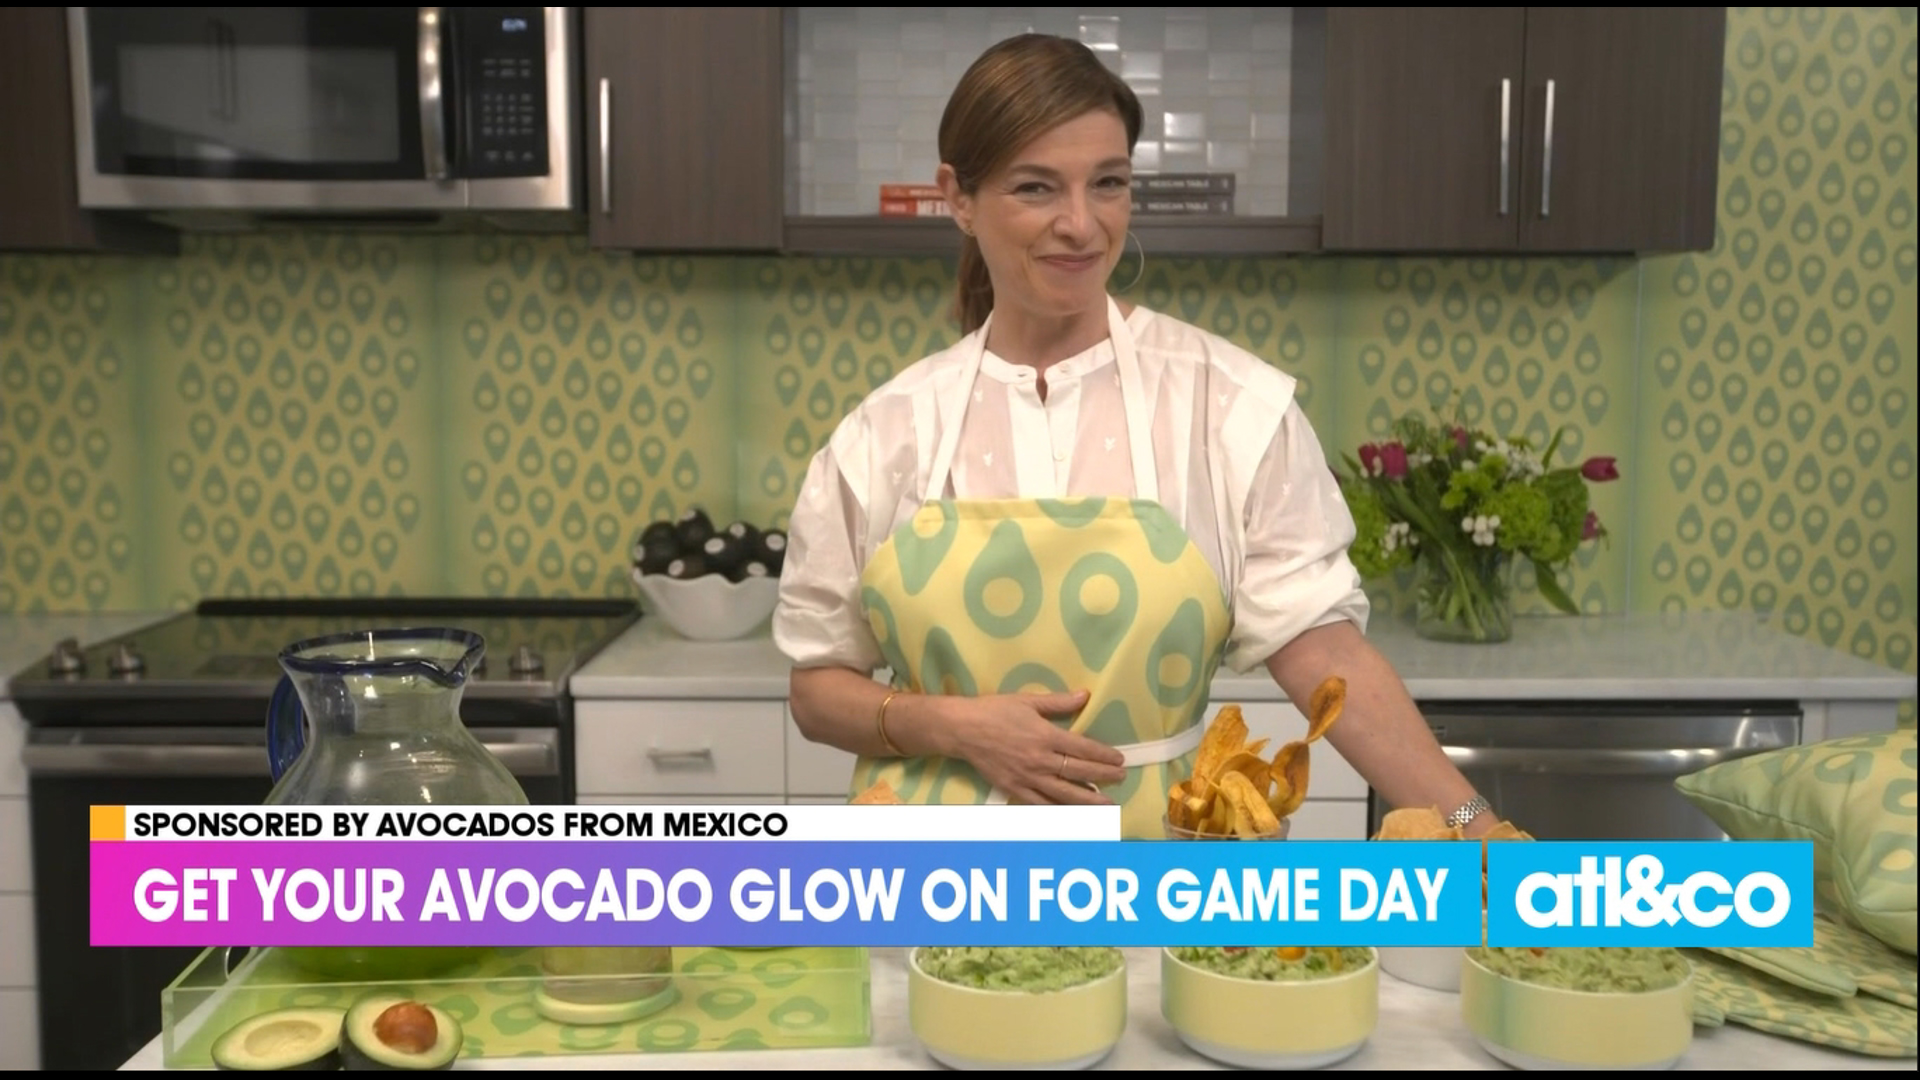 Get your avocado glow on for game day! 'Avocados from Mexico' shares fresh and healthy recipes.